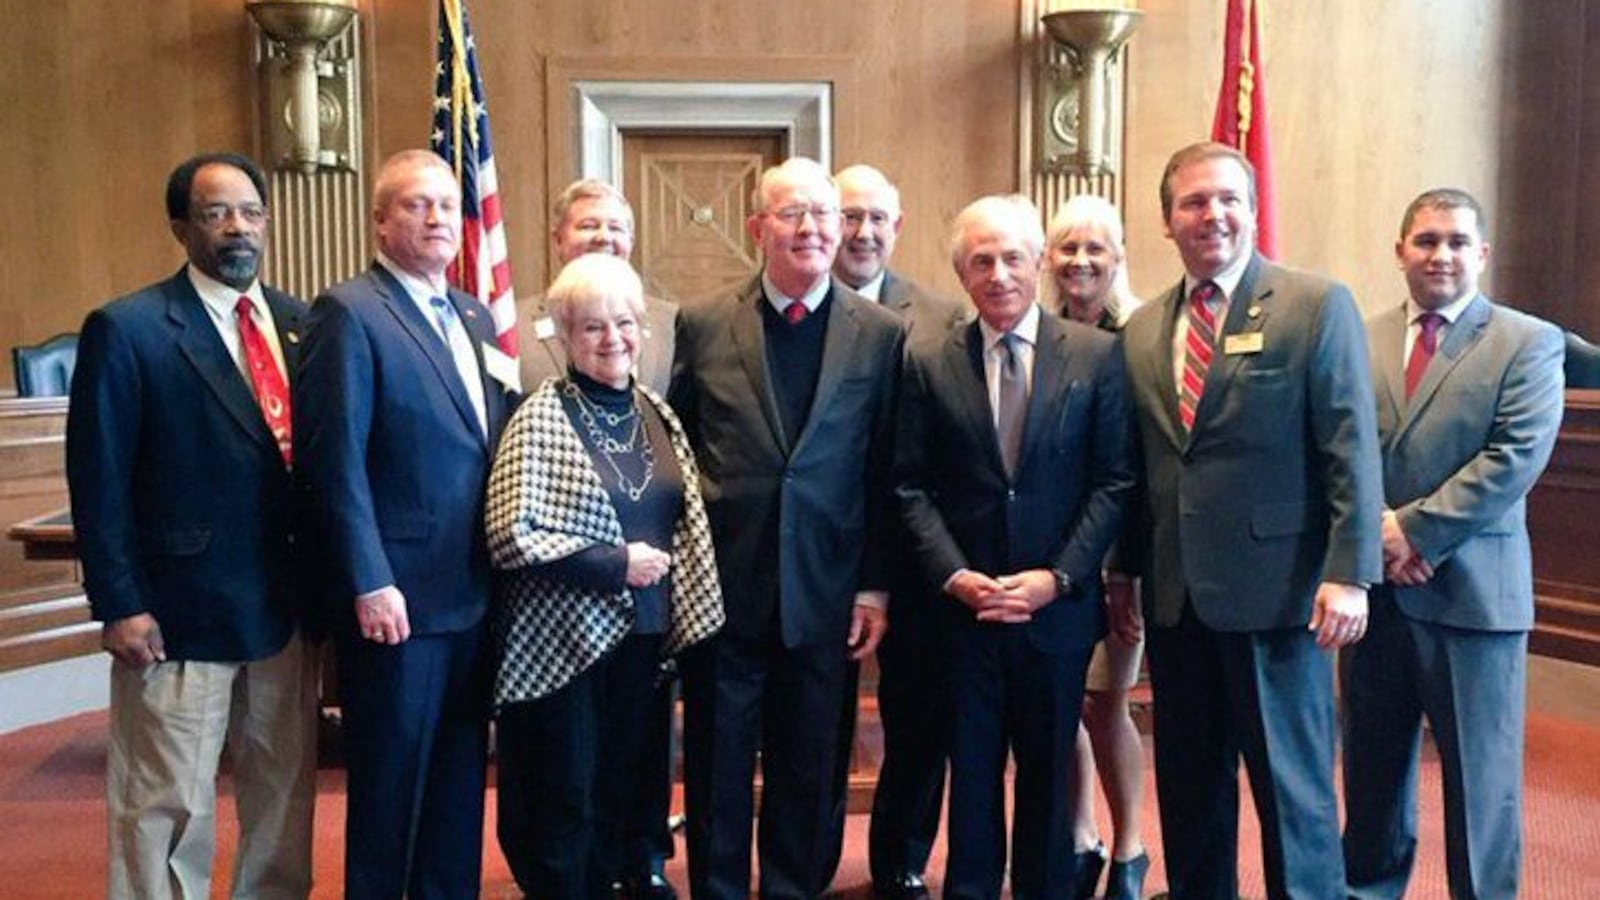 Members of the Tennessee School Boards Association  meet with lawmakers in Washington D.C., including U.S. Sens. Lamar Alexander and Bob Corker.